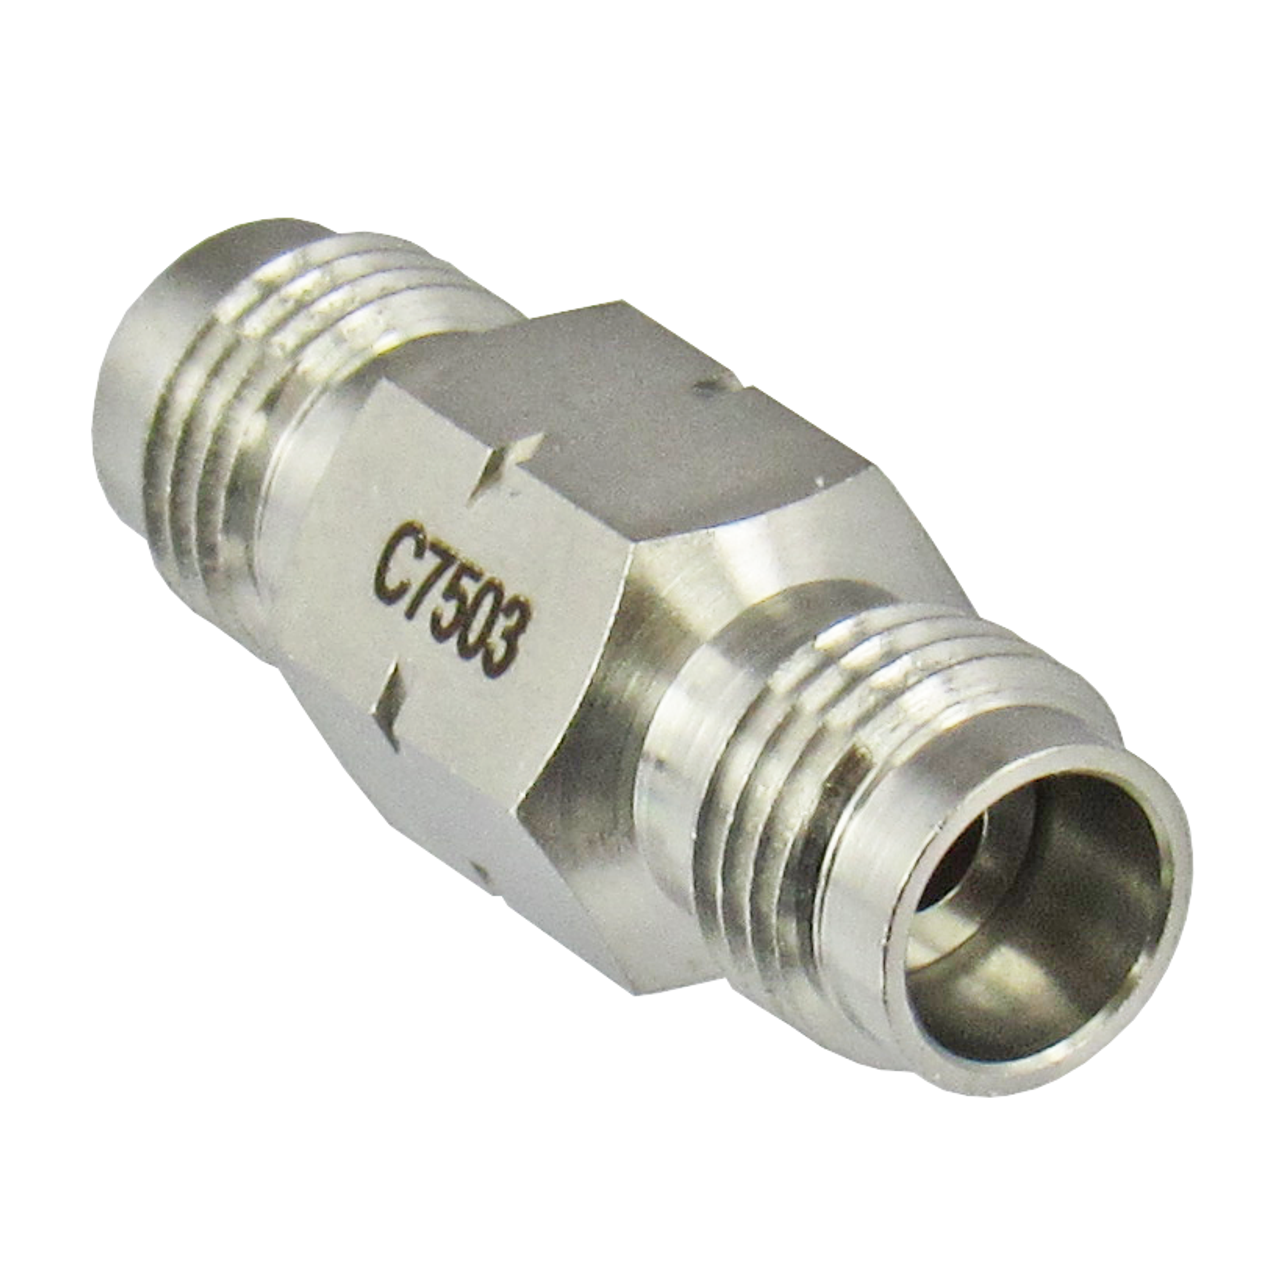 C7503 2.4/Female to 2.4/Female Adapter Centric RF